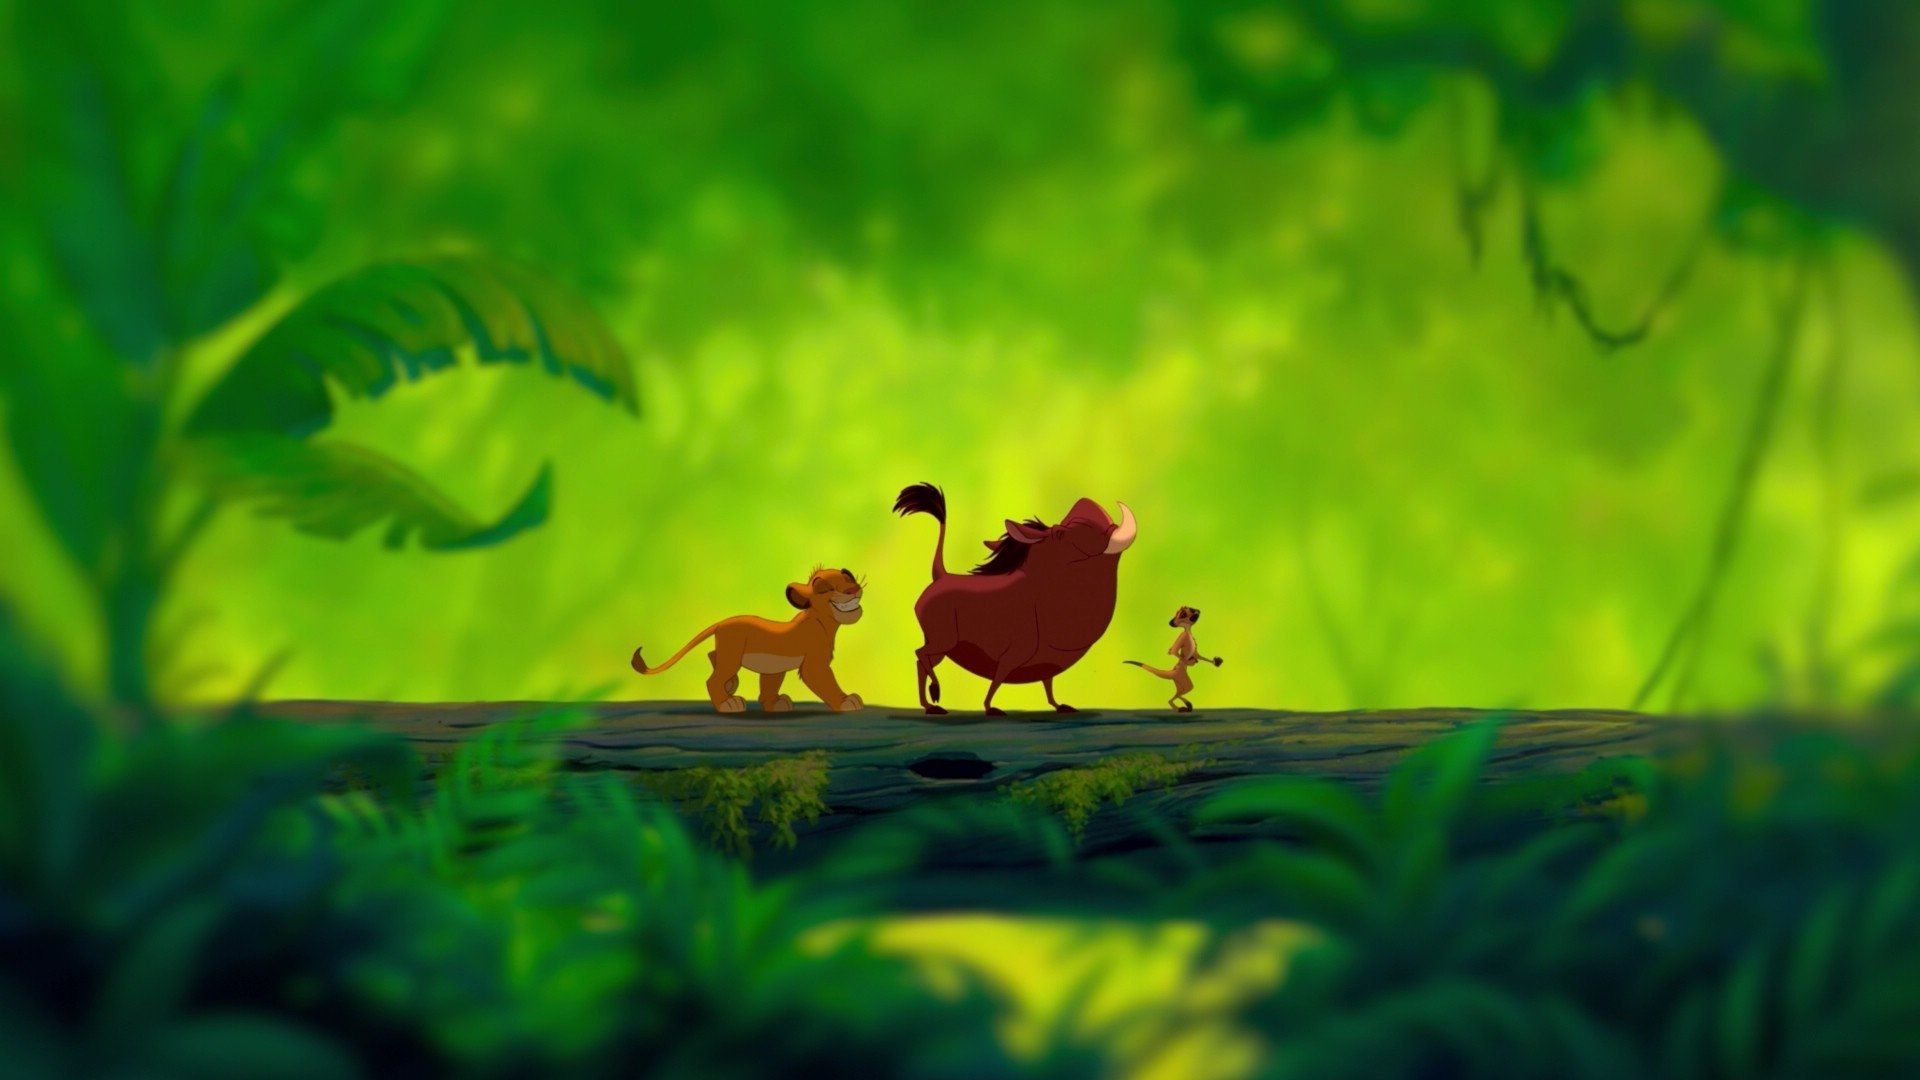 The Lion King Wallpaper Free The Lion King Background